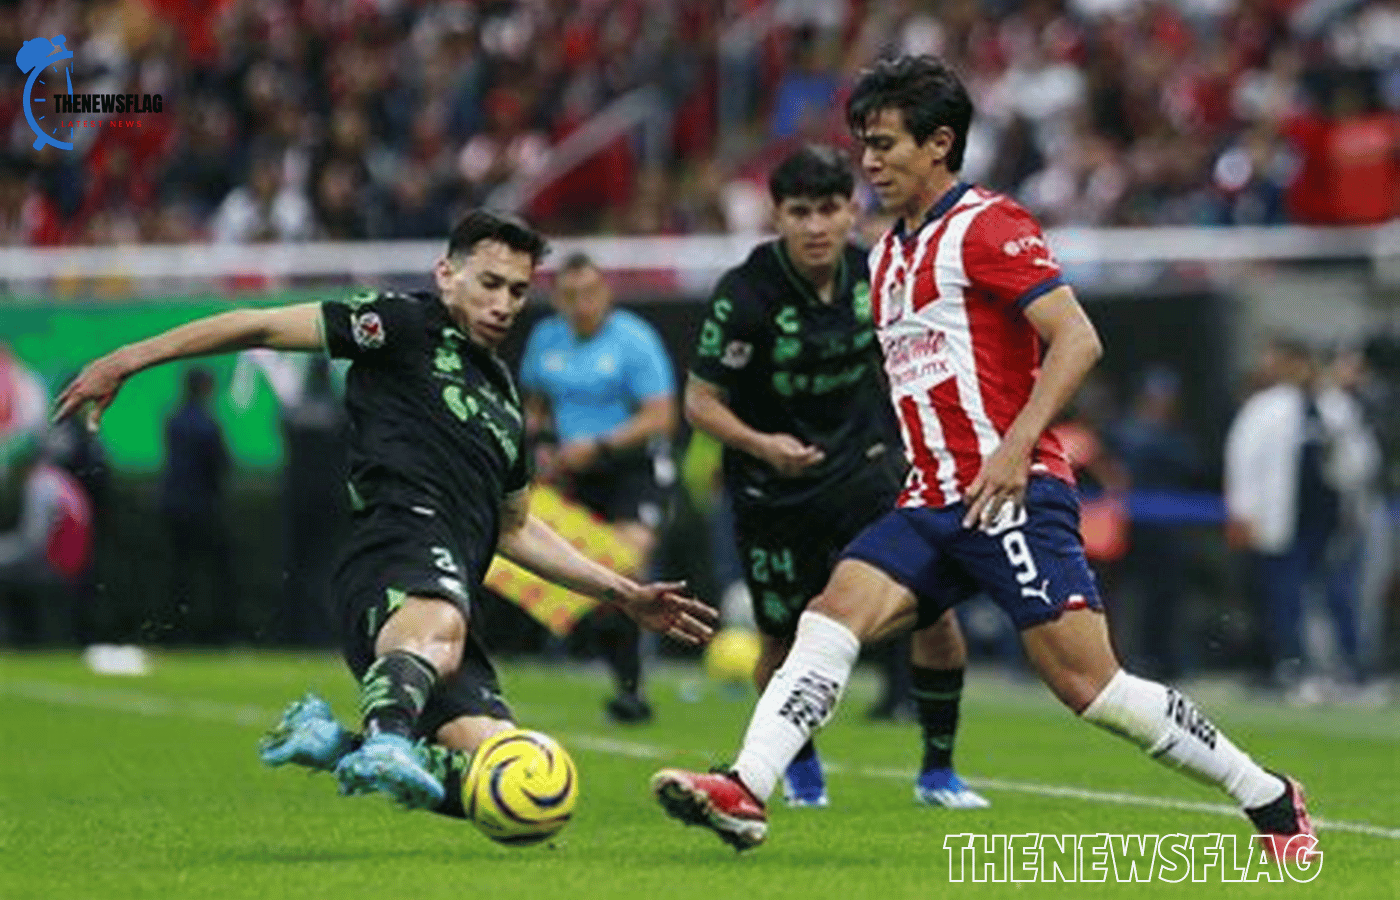 Match day 12's "Super Clásico" round three in Mexico is the main event.